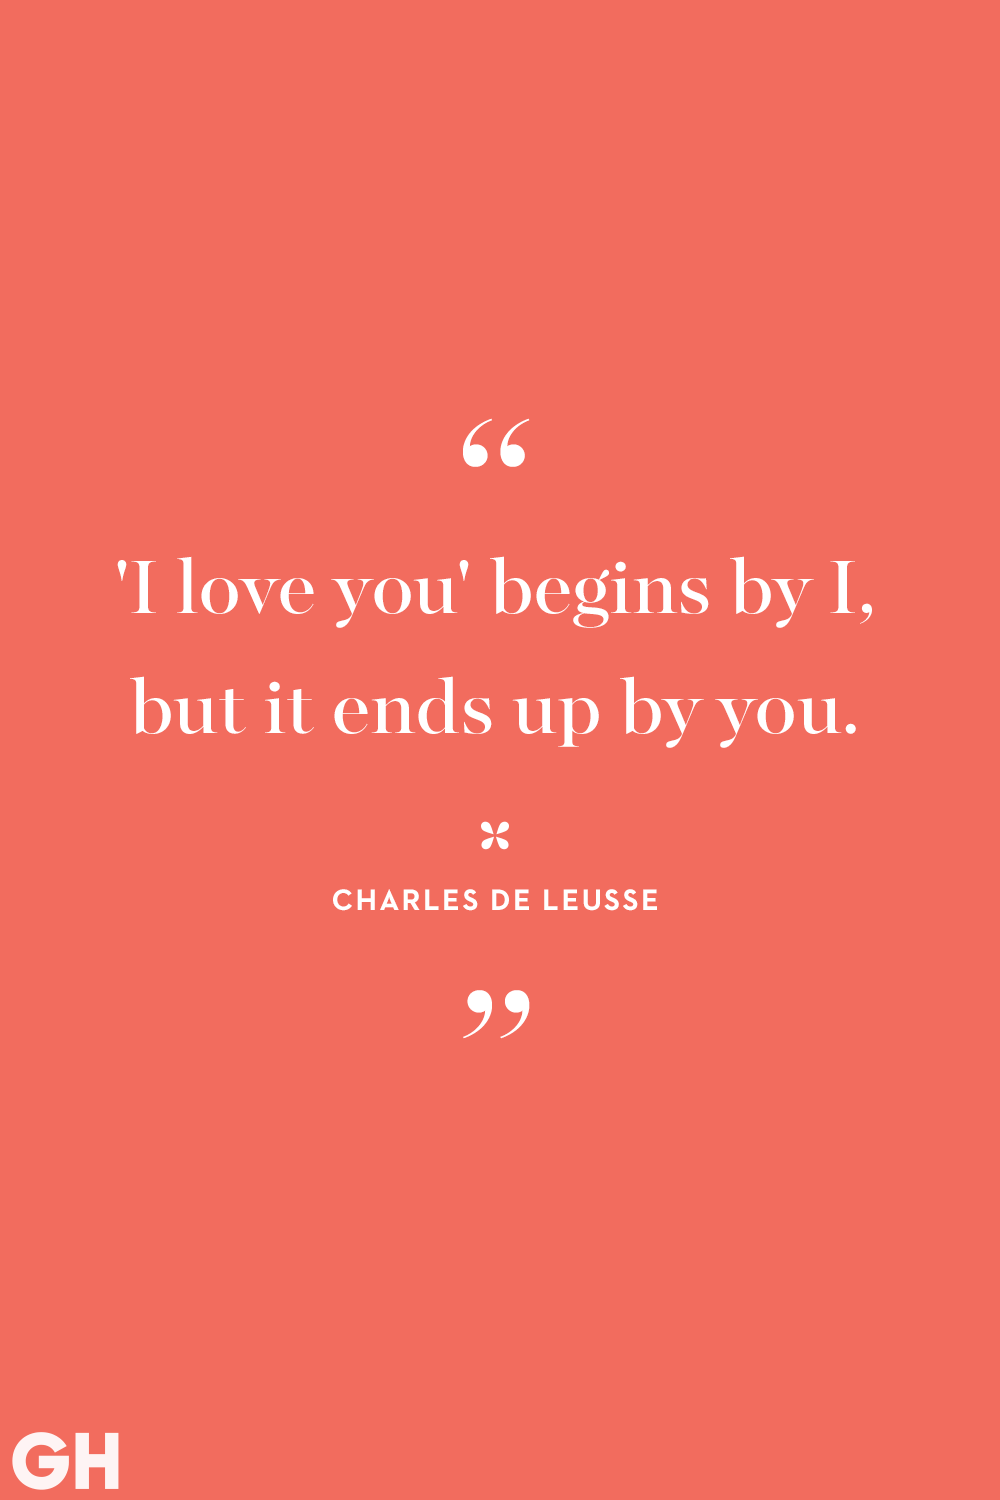 i love you babe quotes